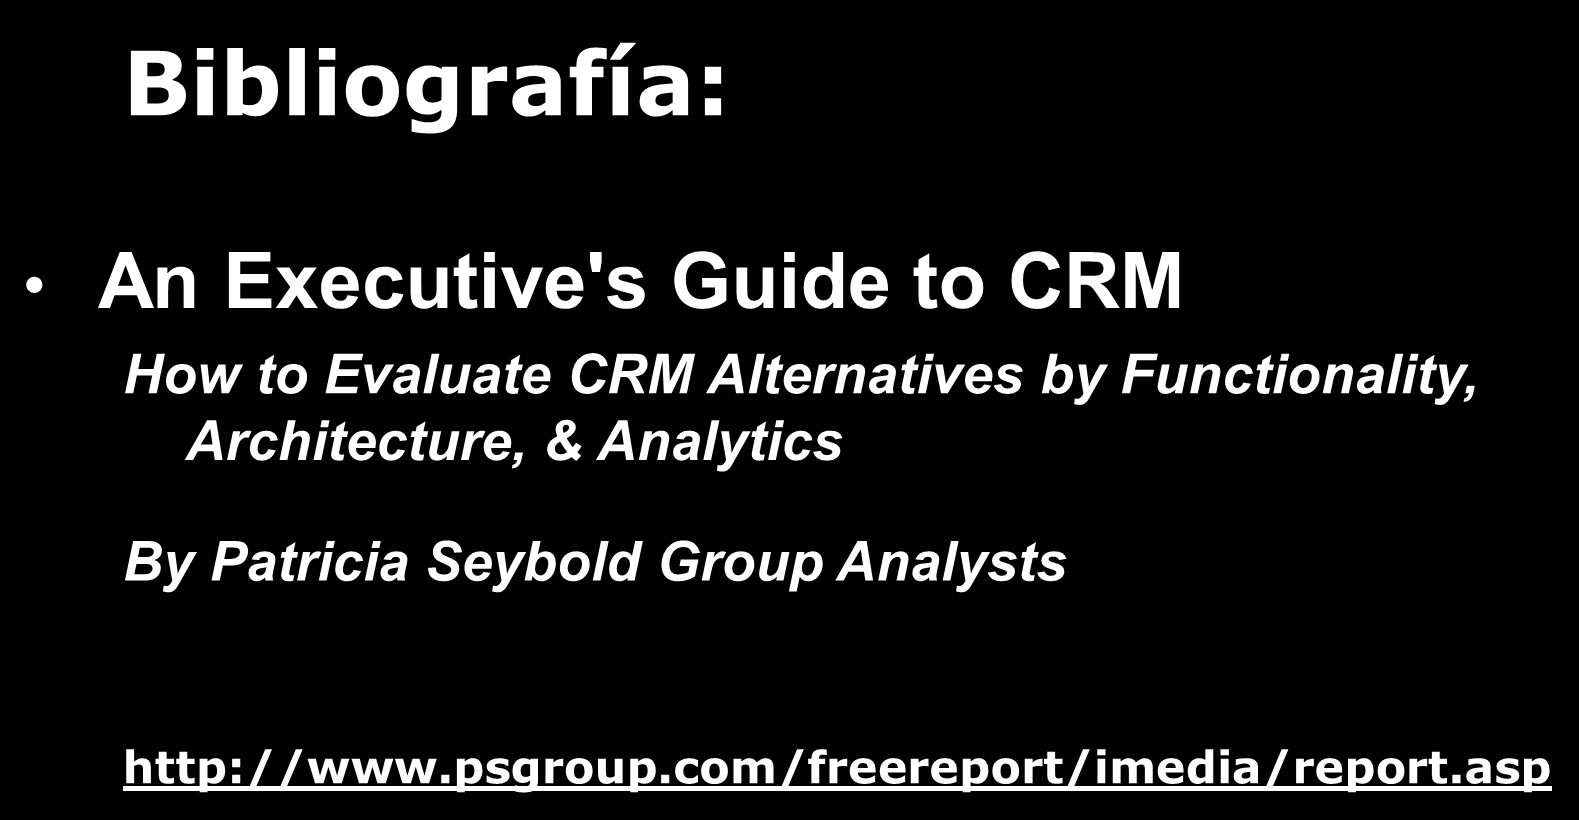 Bibliografía: An Executive's Guide to CRM How to Evaluate CRM Alternatives by Functionality,